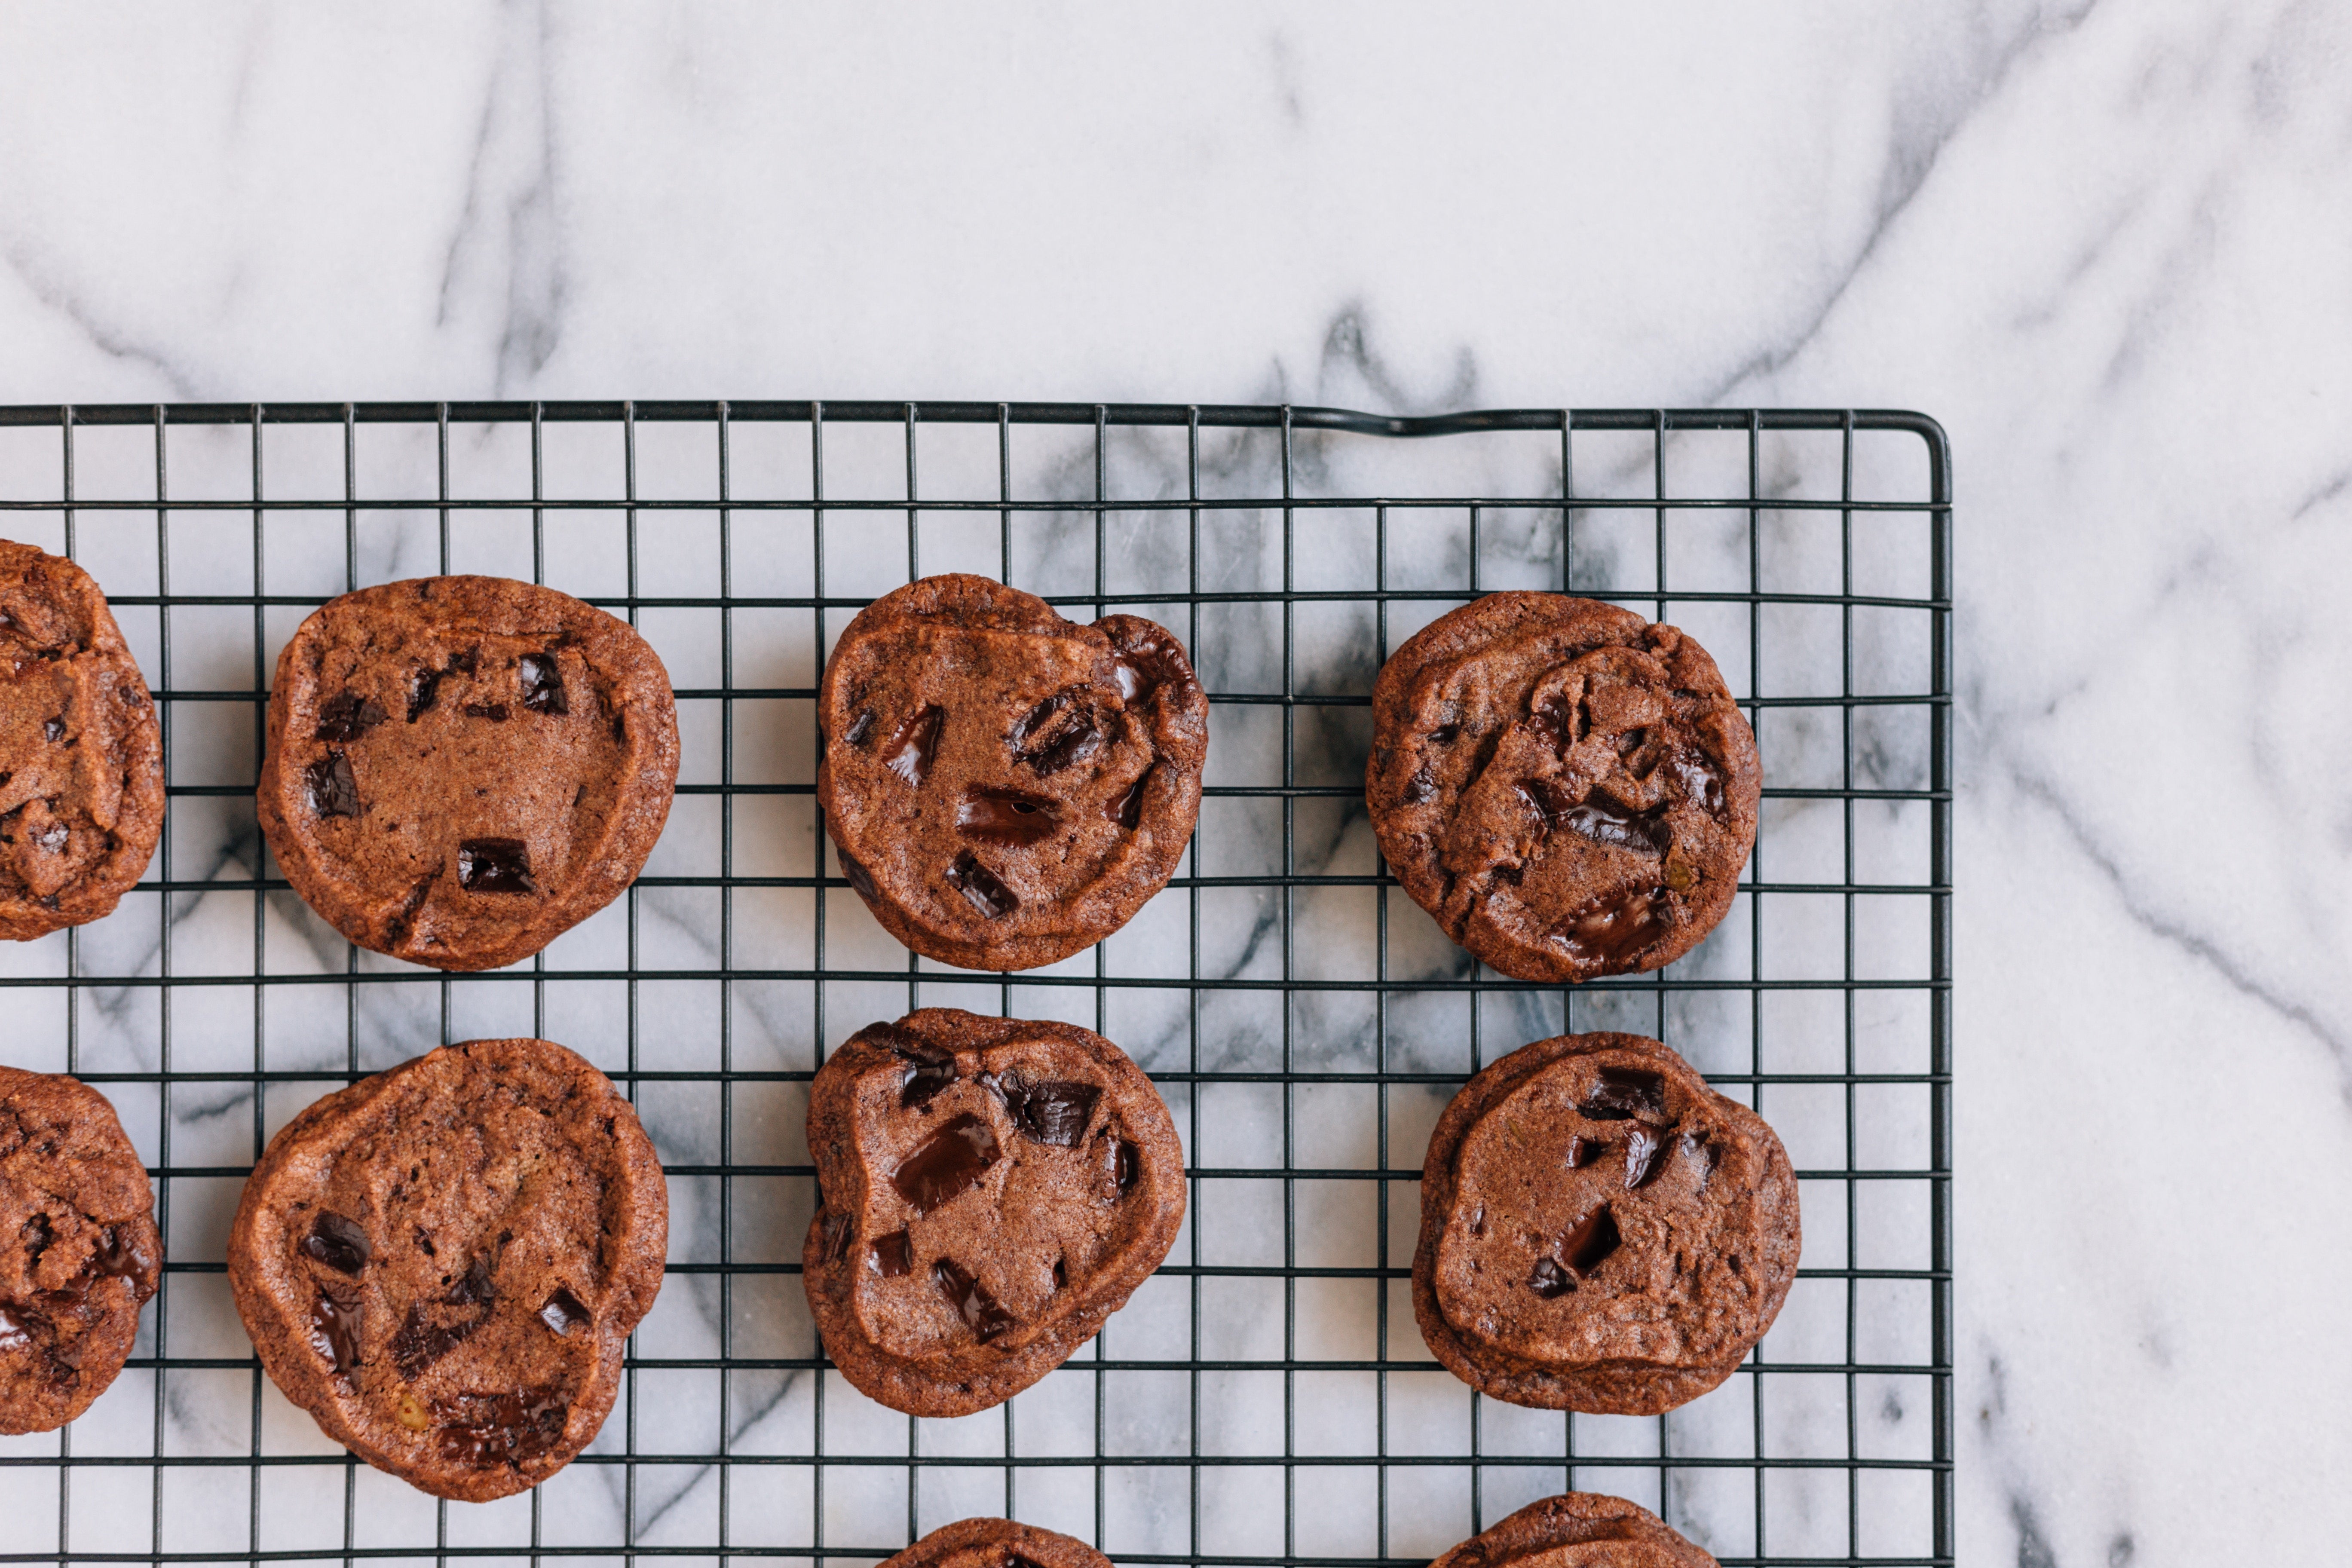 Chocolate Protein Cookies